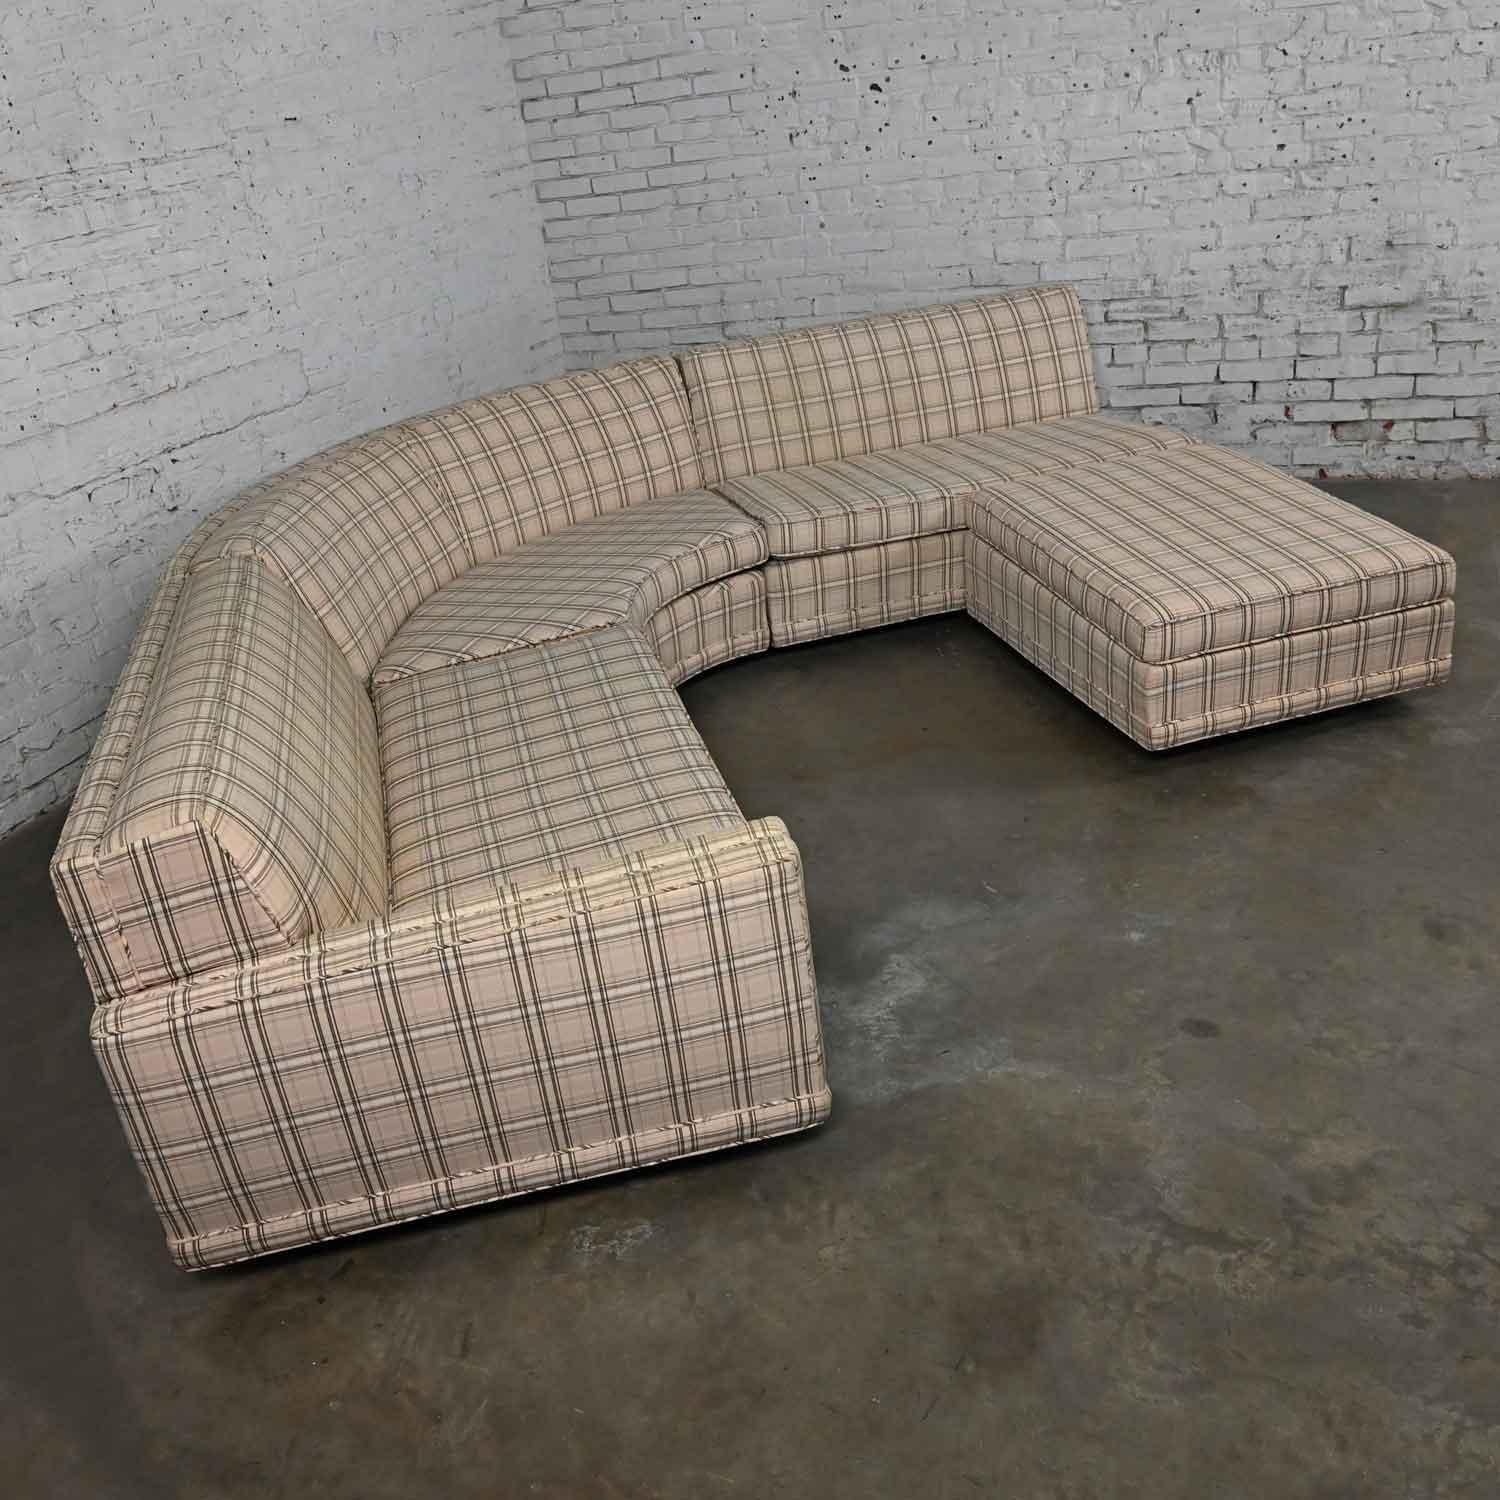 Lovely vintage Mid-Century Modern to modern plaid tuxedo curved sectional sofa with ottoman. Beautiful condition, keeping in mind that this is vintage and not new so will have signs of use and wear. The sofa has been professionally cleaned but there